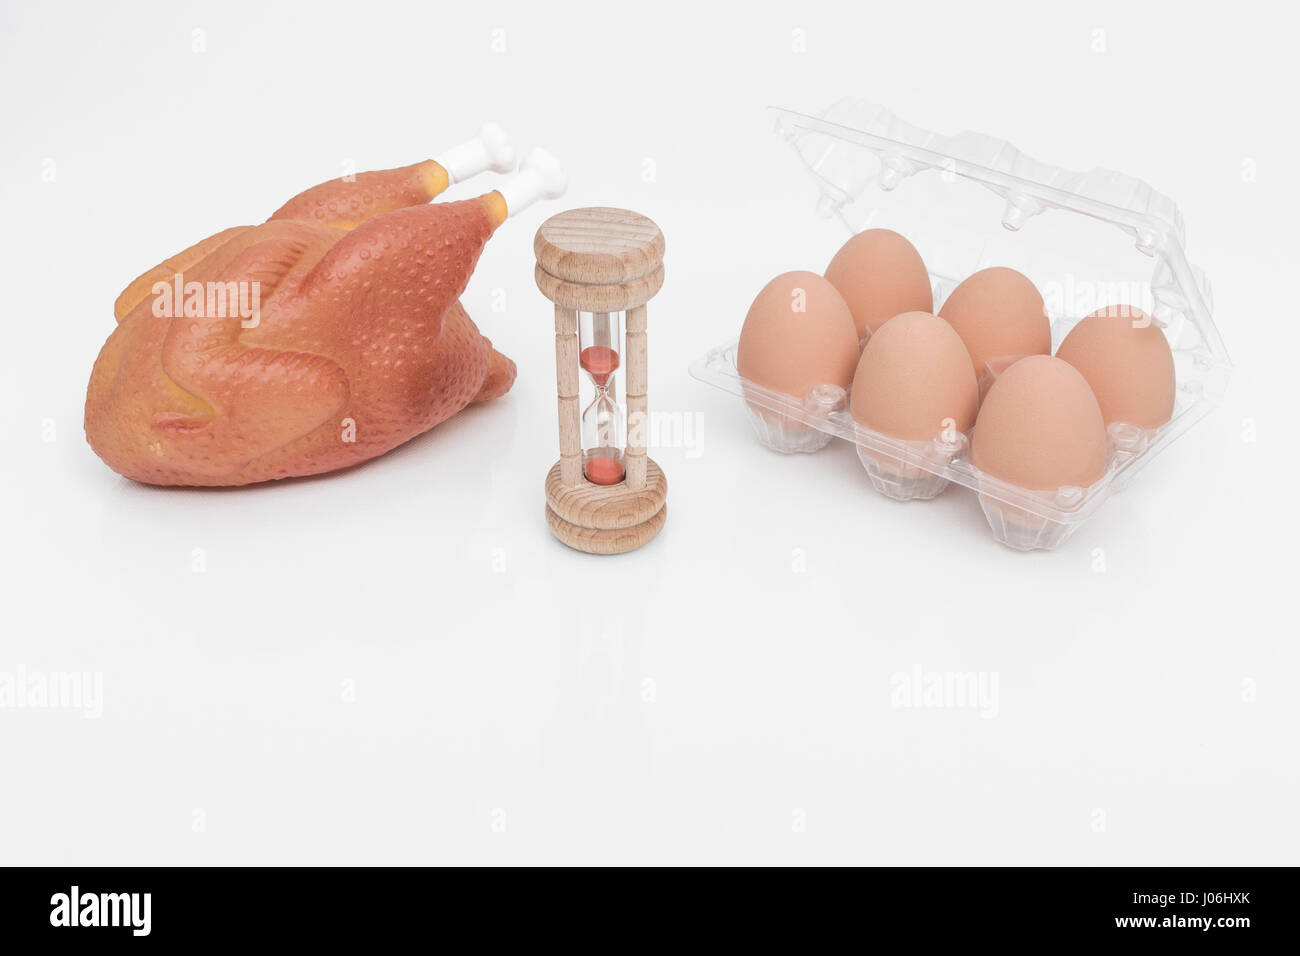 Wooden egg timer with box of eggs and replica chicken - as metaphor for that age-old question of which came first - chicken or egg. Stock Photo